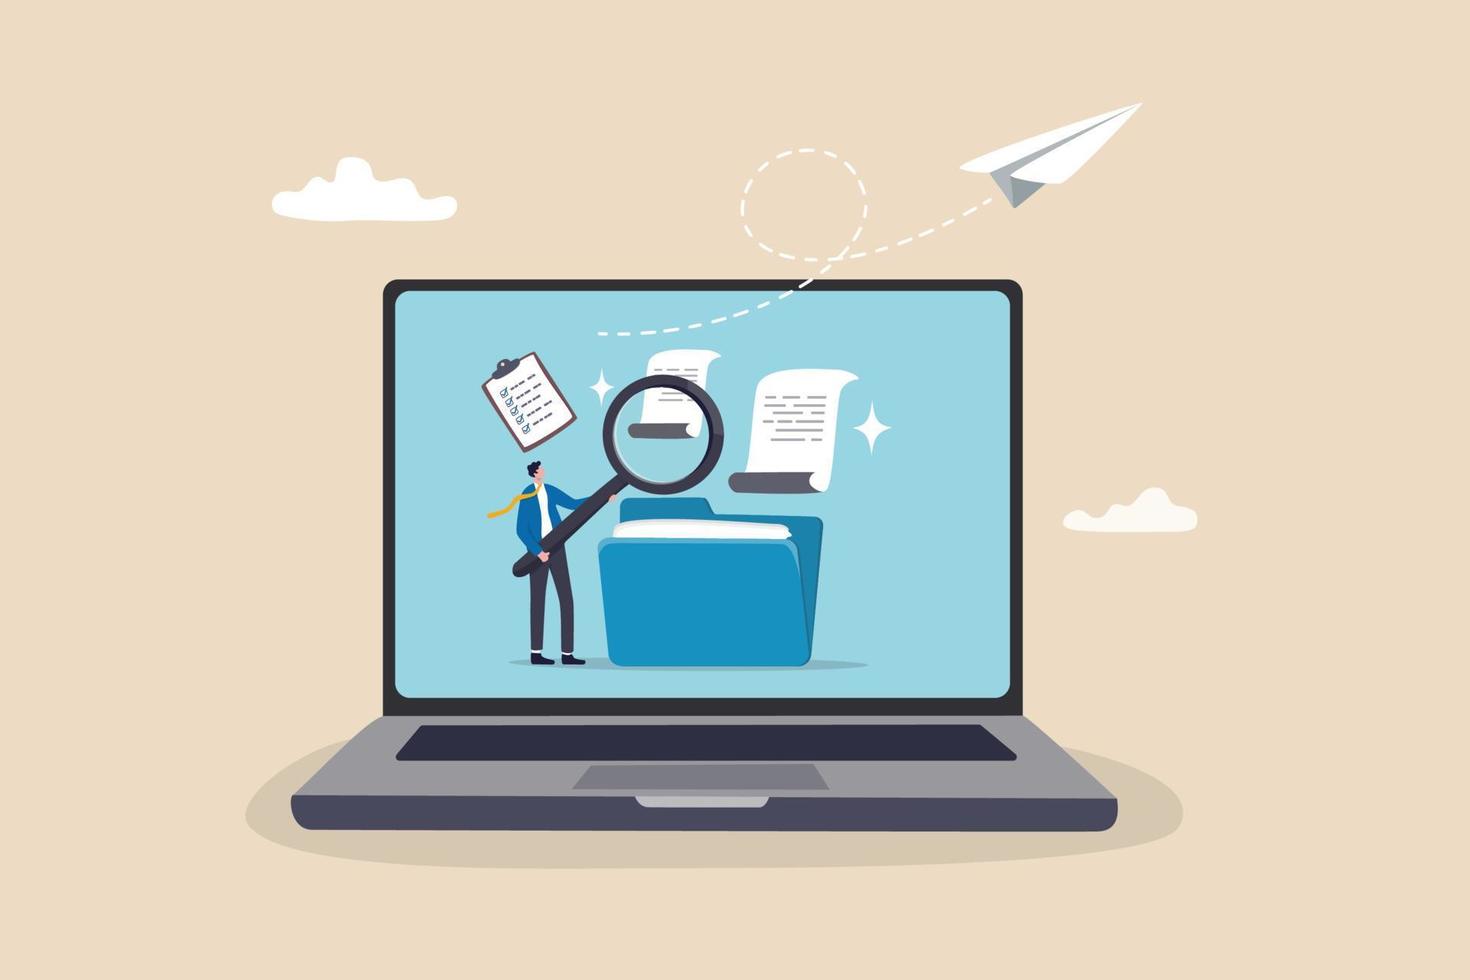 File management or documents archive, computer data backup or virus scan, online cloud storage or search for files concept, businessman with magnifying glass search for file in folder computer laptop. vector